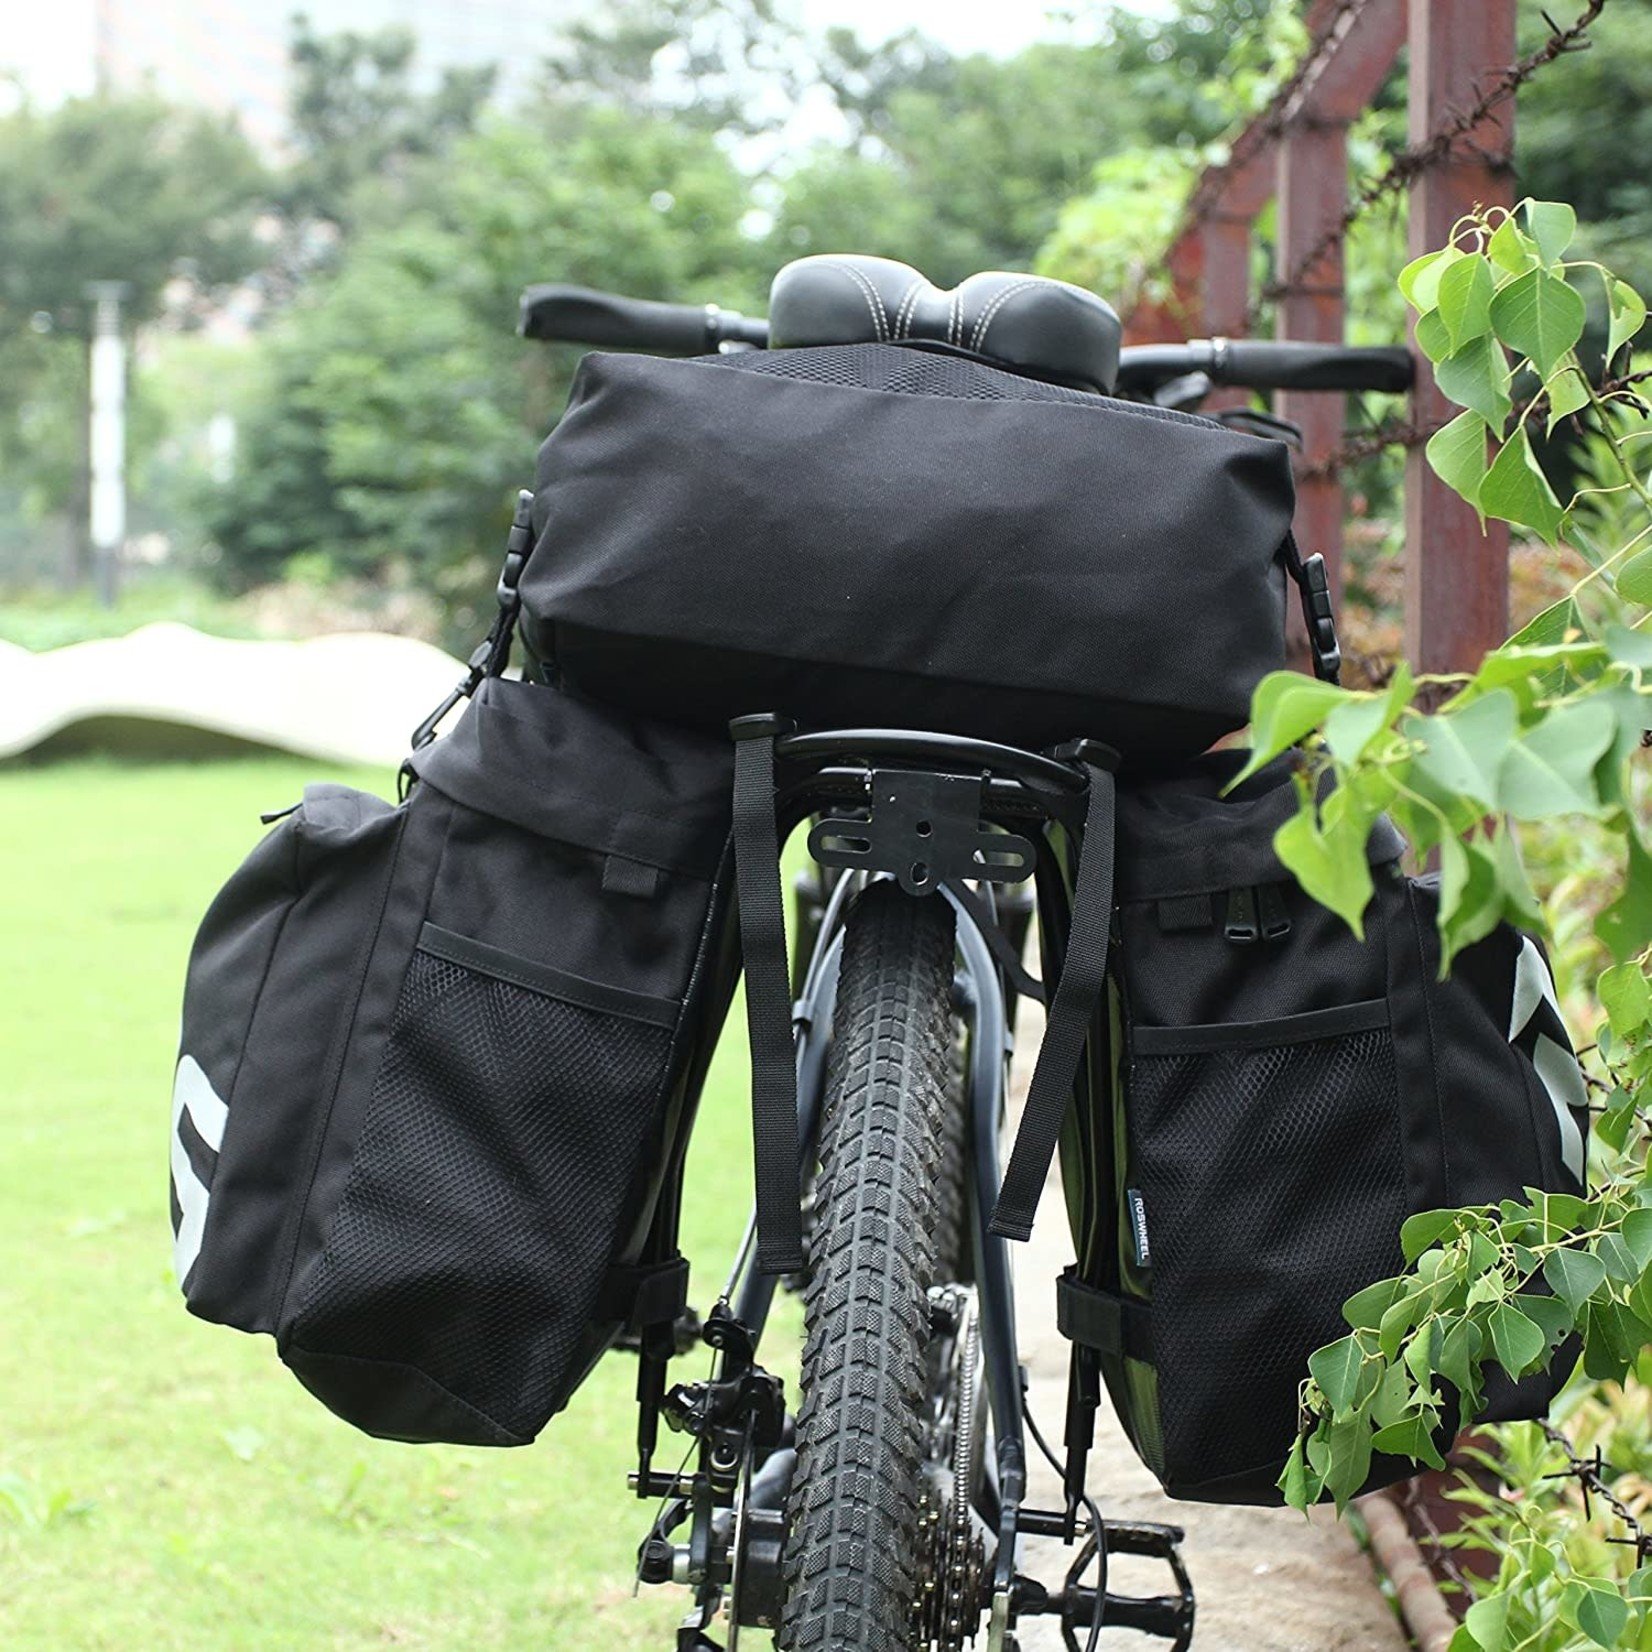 ROSWHEEL Pannier set, Top bag and side bags, water resistant,  Side bags H33/W30cm, Top bag  H34/W30cm, 1000D reinforced polyester, Black